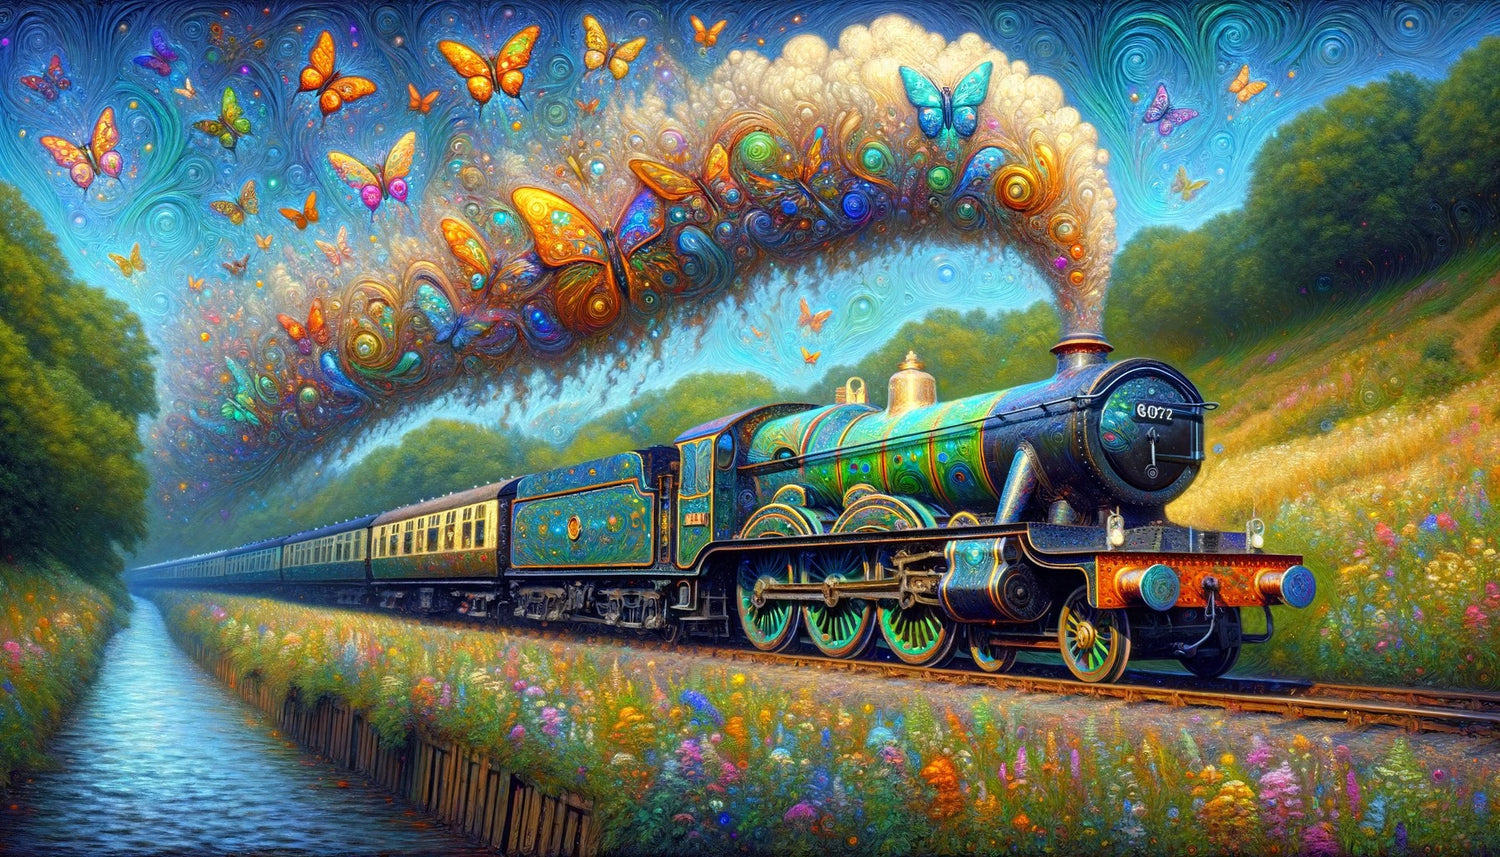 A Train_s Journey by the River of Flowers and Butterflies